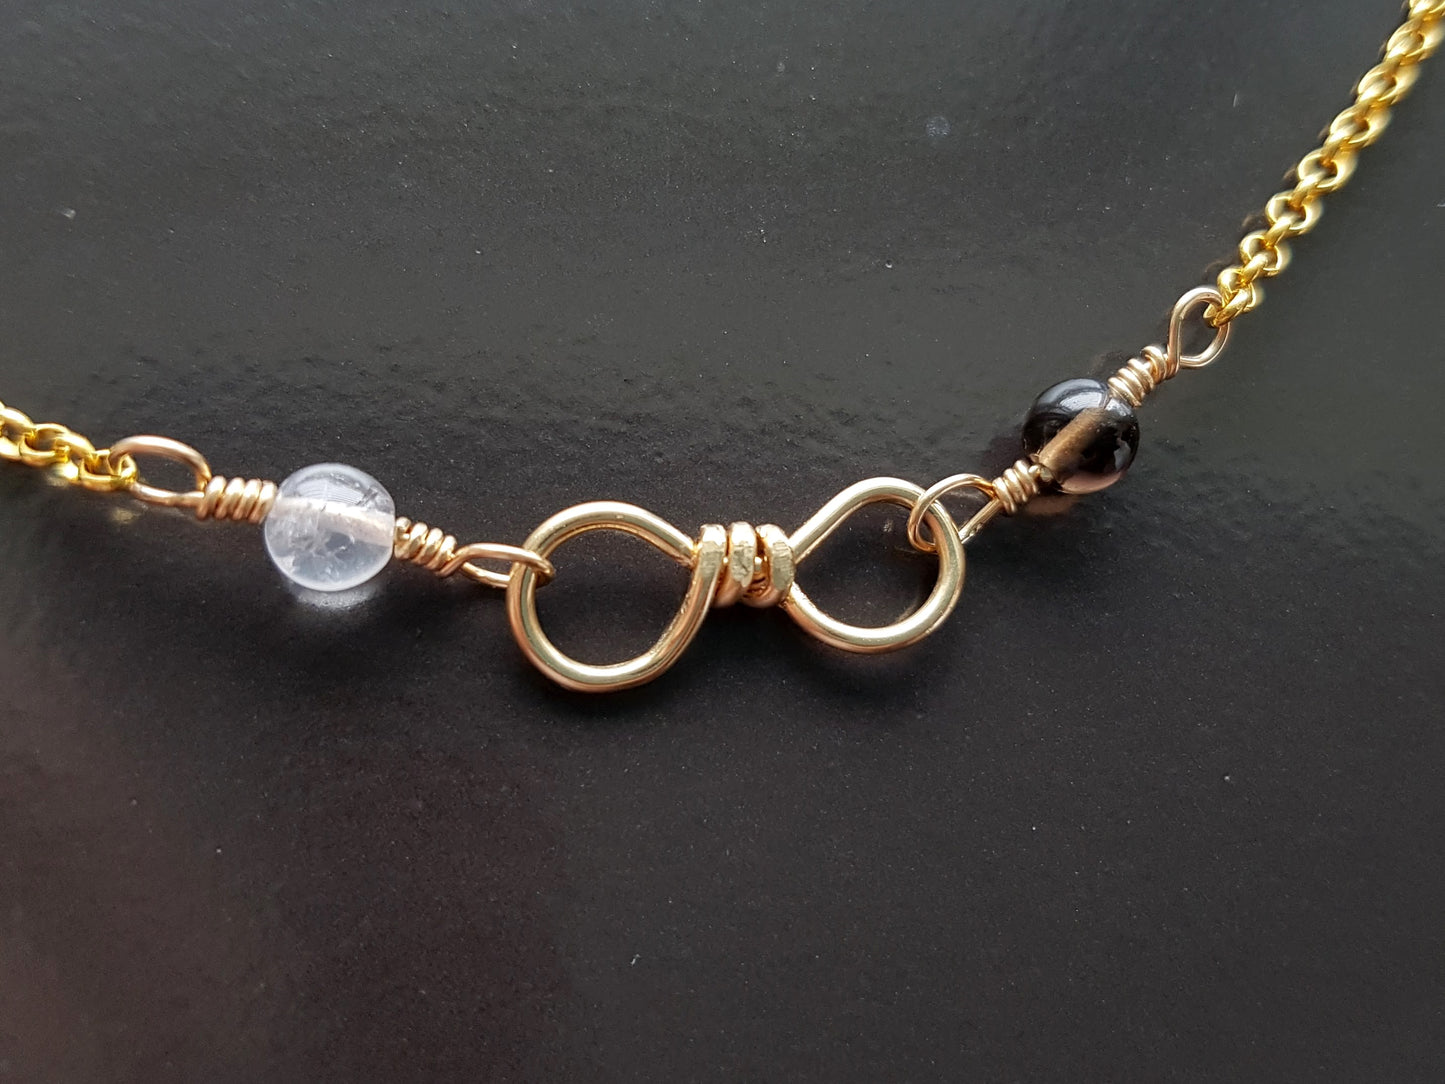 Golden Infinity Birthstone Anklet-Ankle Bracelet, 14k Gold filled Hand Forged Infinity pendant with two Birthstones, attached to rolo chain and fasten with lobster claw clasp. 